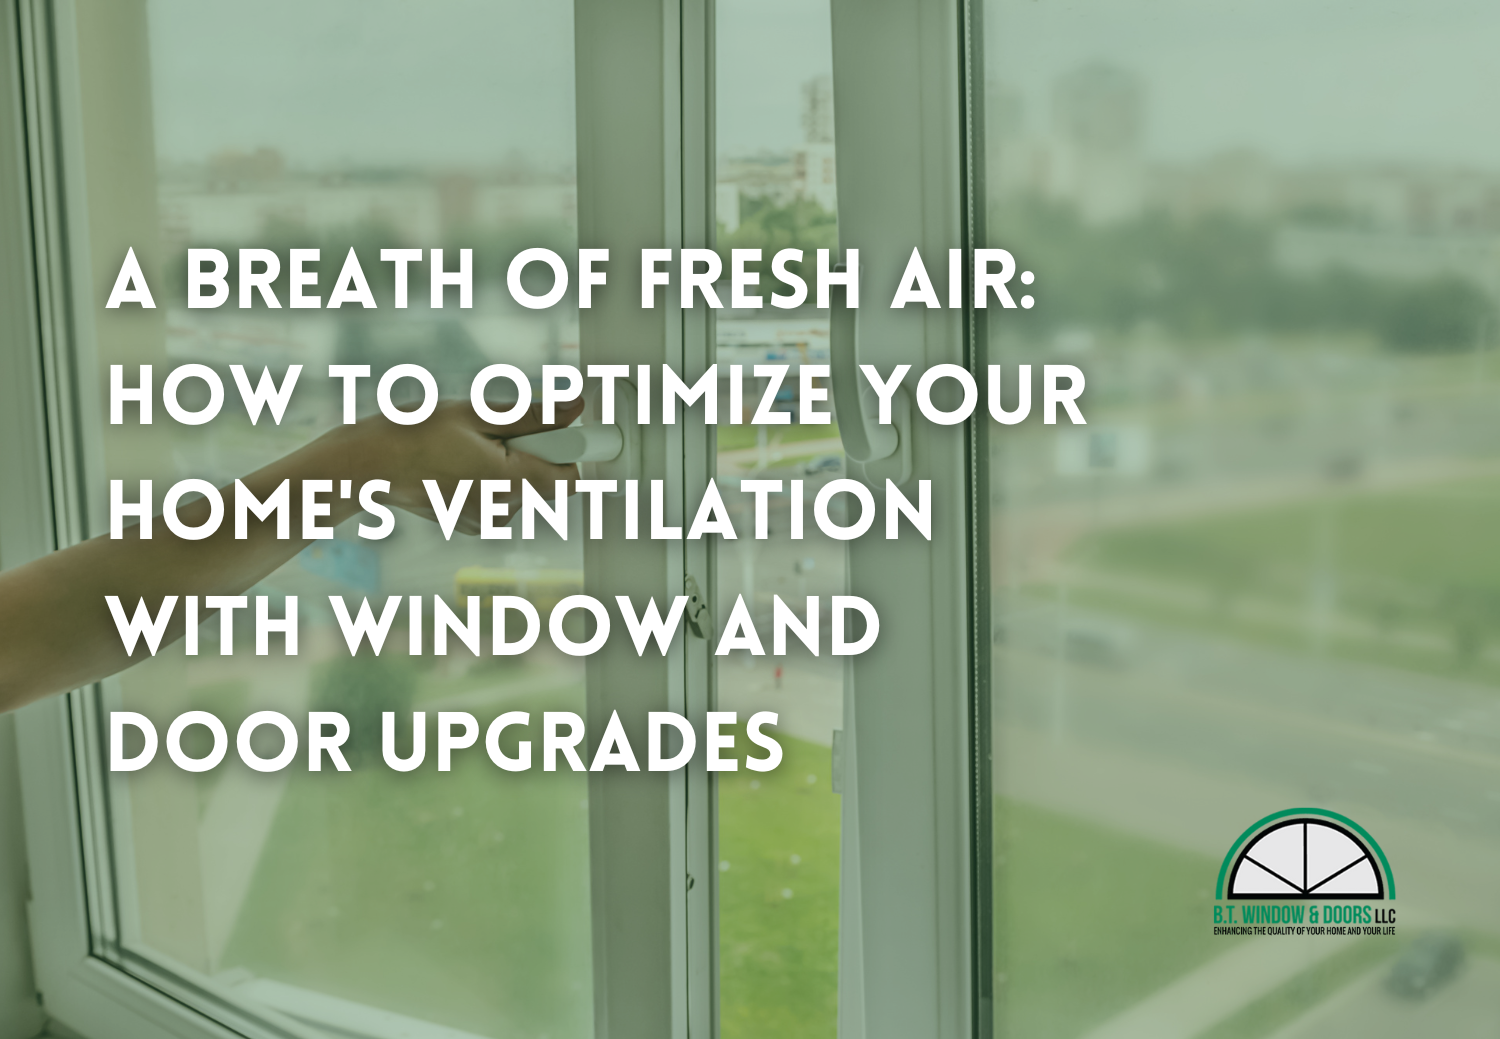 A Breath of Fresh Air: How to Optimize Your Home's Ventilation with Window and Door Upgrades